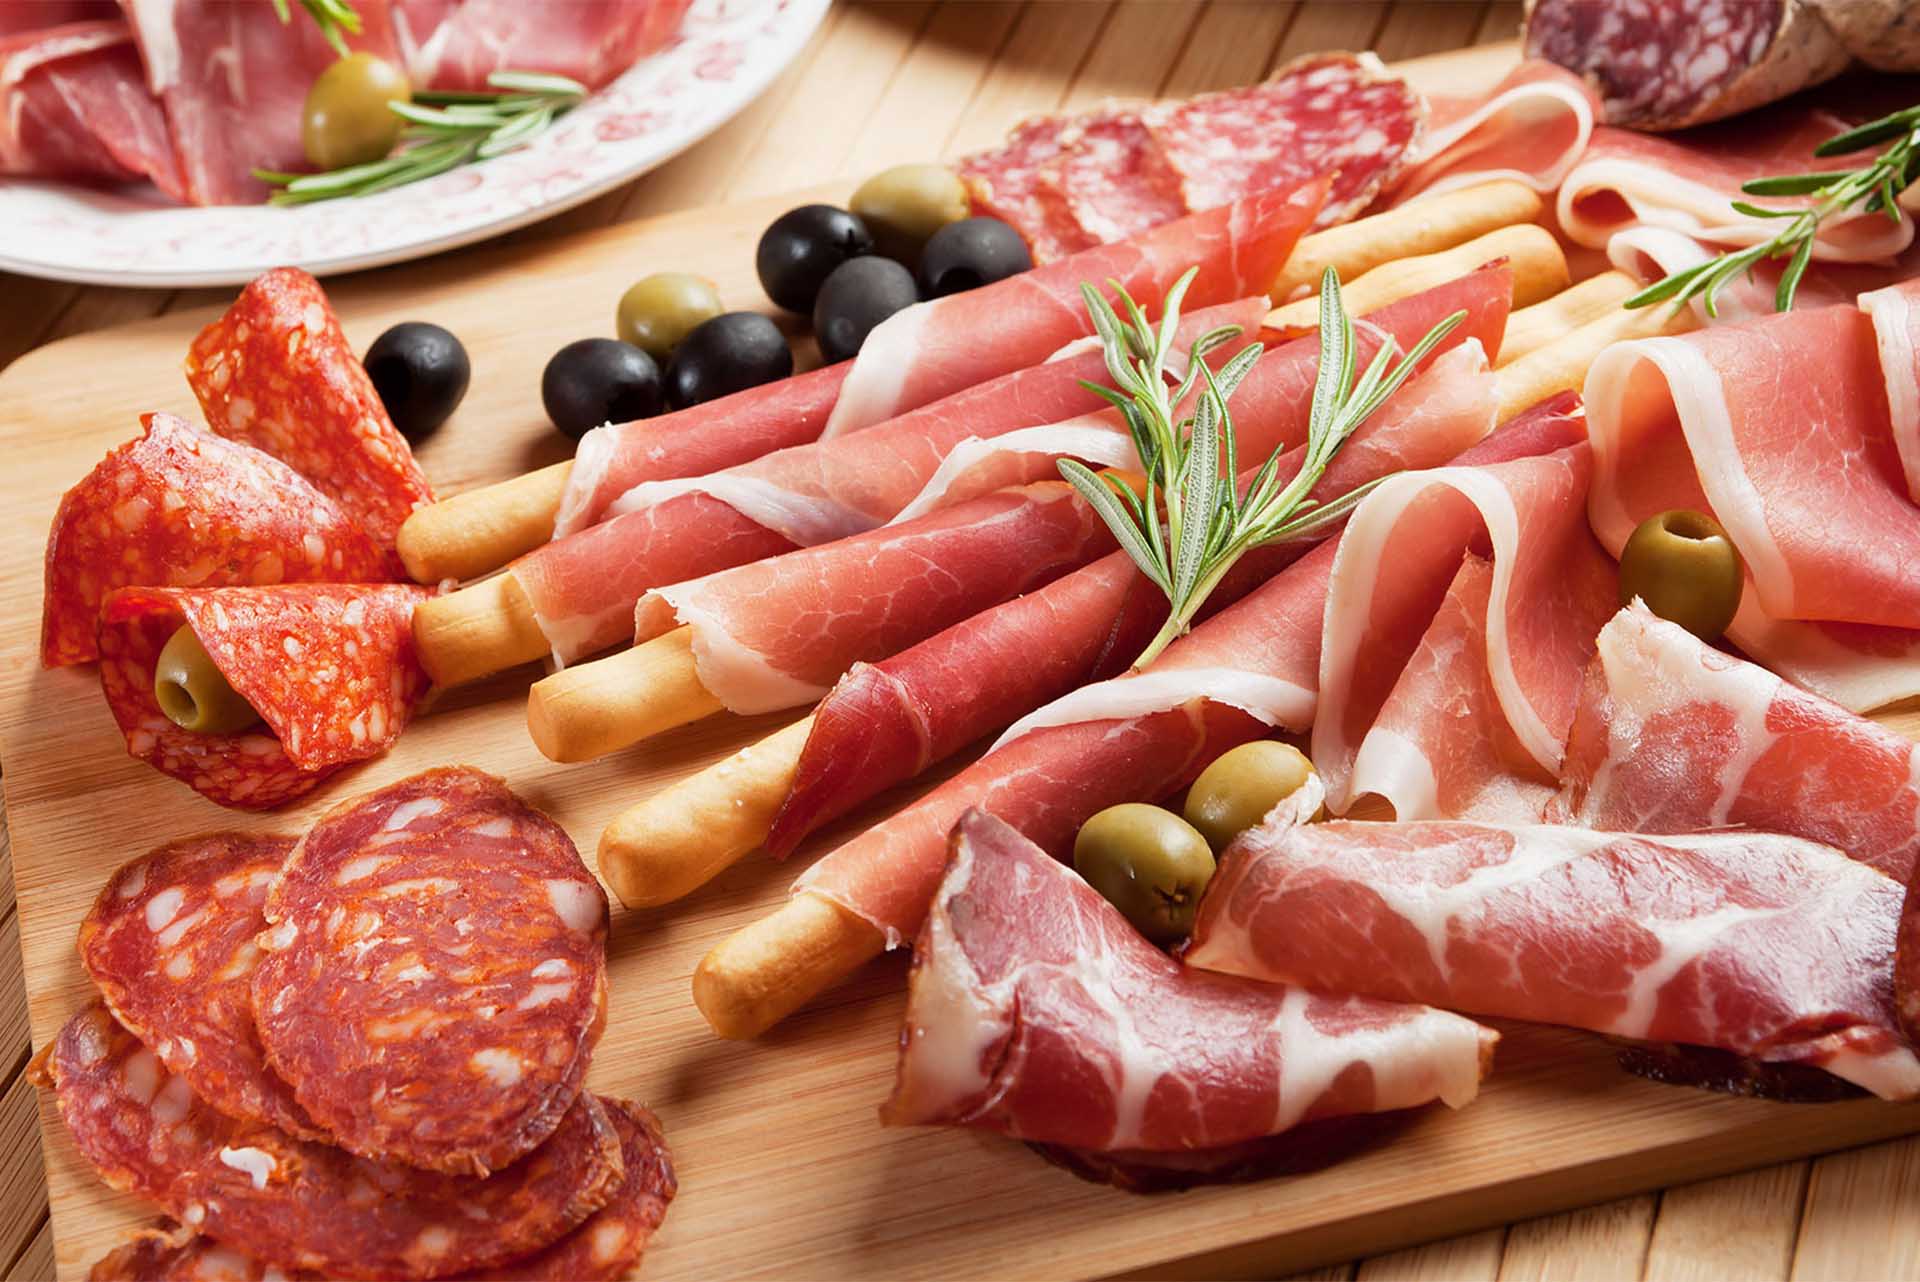 Do cured meats go out of date